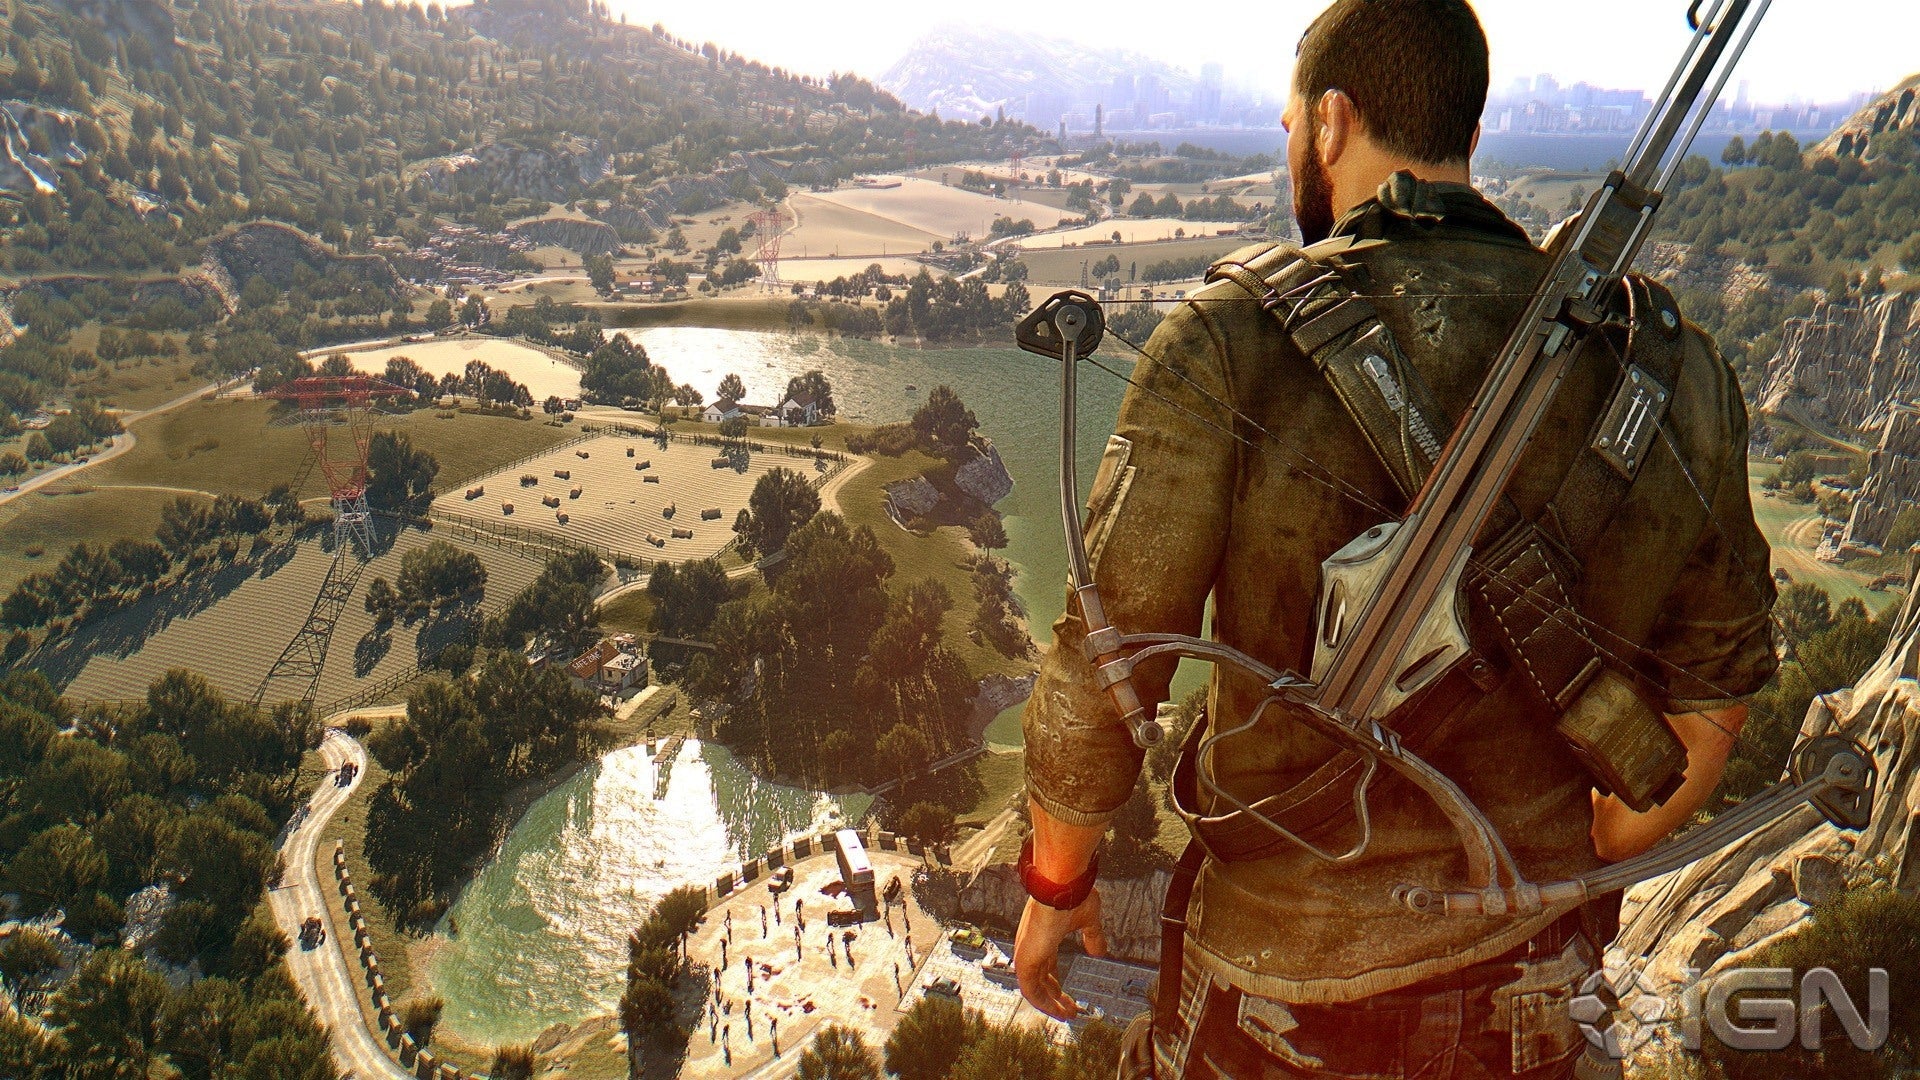 STARTER PACK: Dying Light: Enhanced Edition + Dying Light 2 Stay Human Cuenta Compartida Xbox One Xbox Series